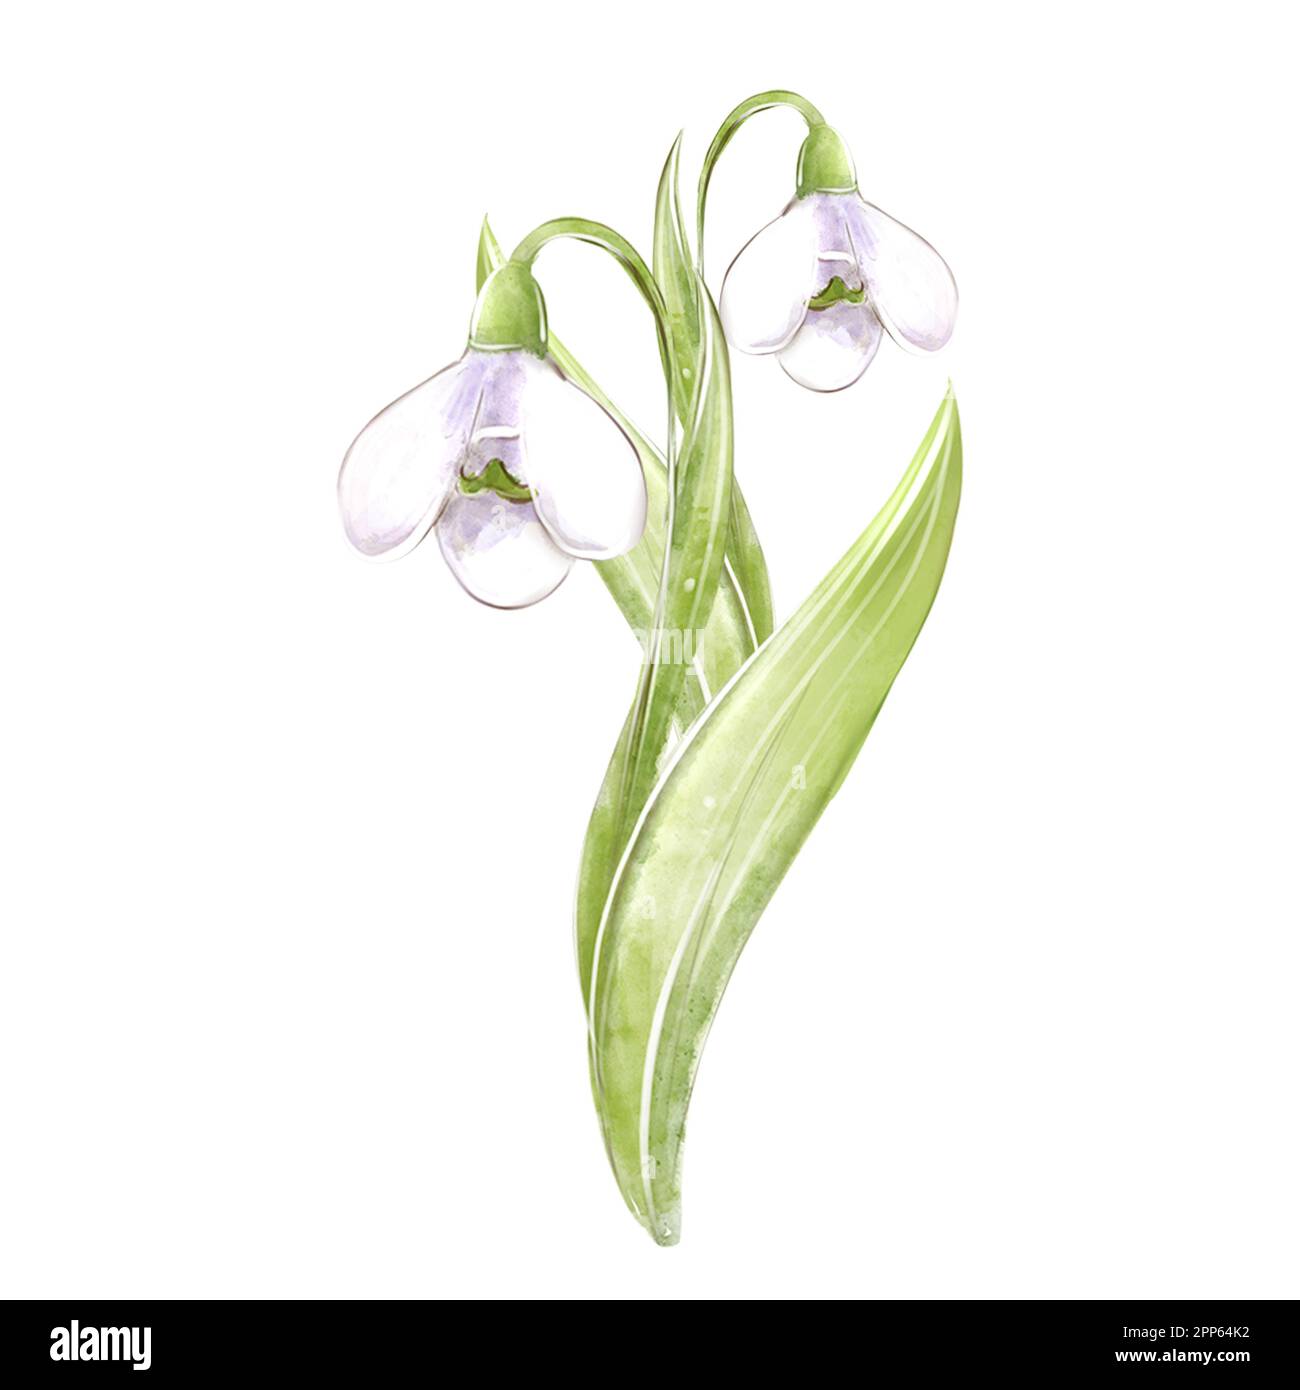 Snowdrop, watercolor illustration isolated on white background for design. Spring flowers, decor, Easter. Stock Photo